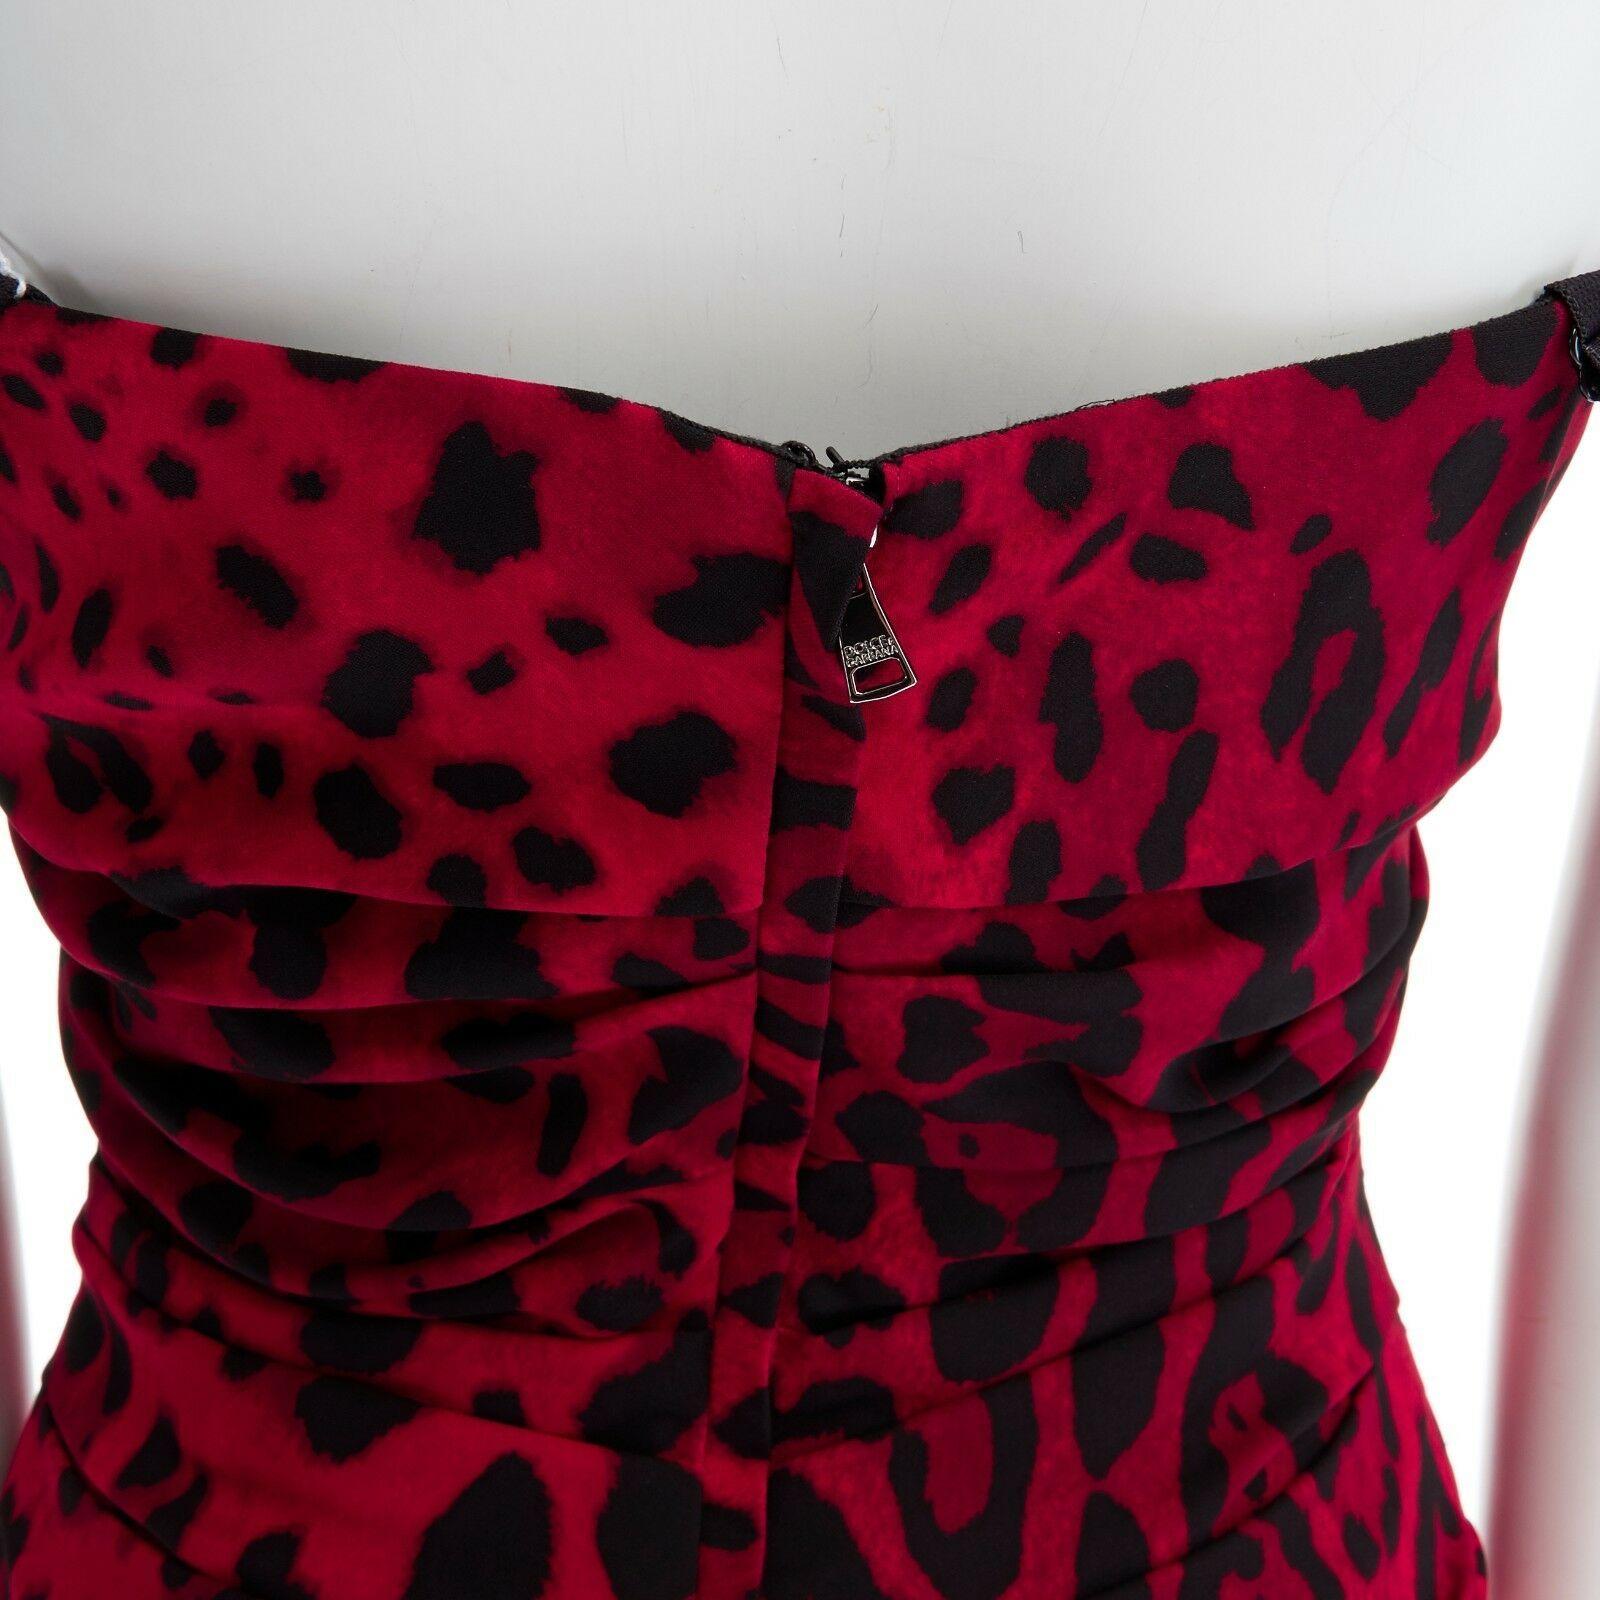 DOLCE GABBANA red leopard print silk ruched draped party dress IT40 S
DOLCE & GABBANA
Silk, elastane. Red and black leopard print. 
Ruched along side seam. Black adjustable silk spaghetti strap. 
Concealed zip back closure. Silver-tone zip pull